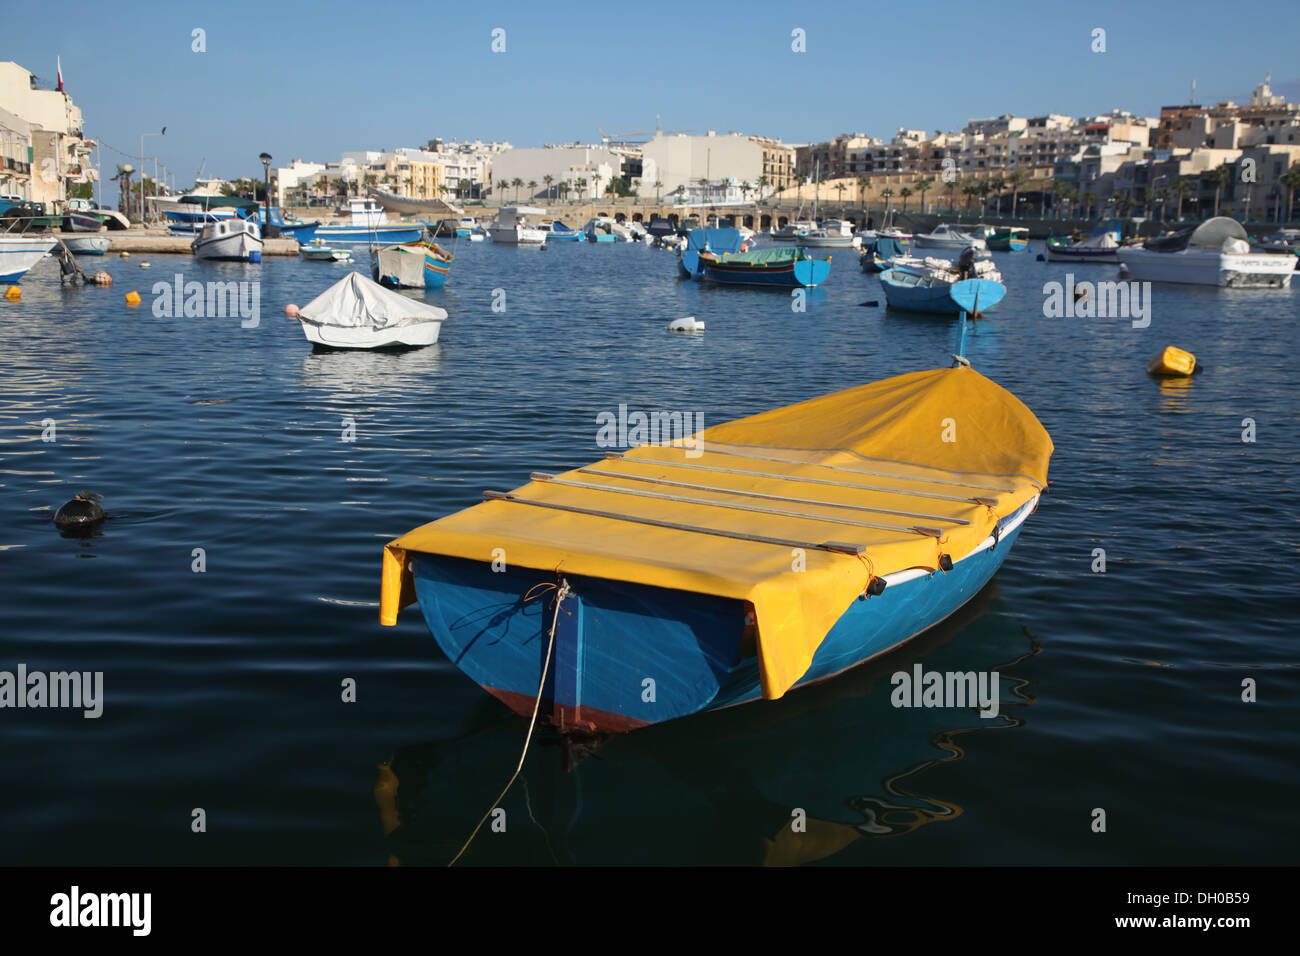 A neat yellow and blue dinghy moored in Marsascala's evening light Stock Photo